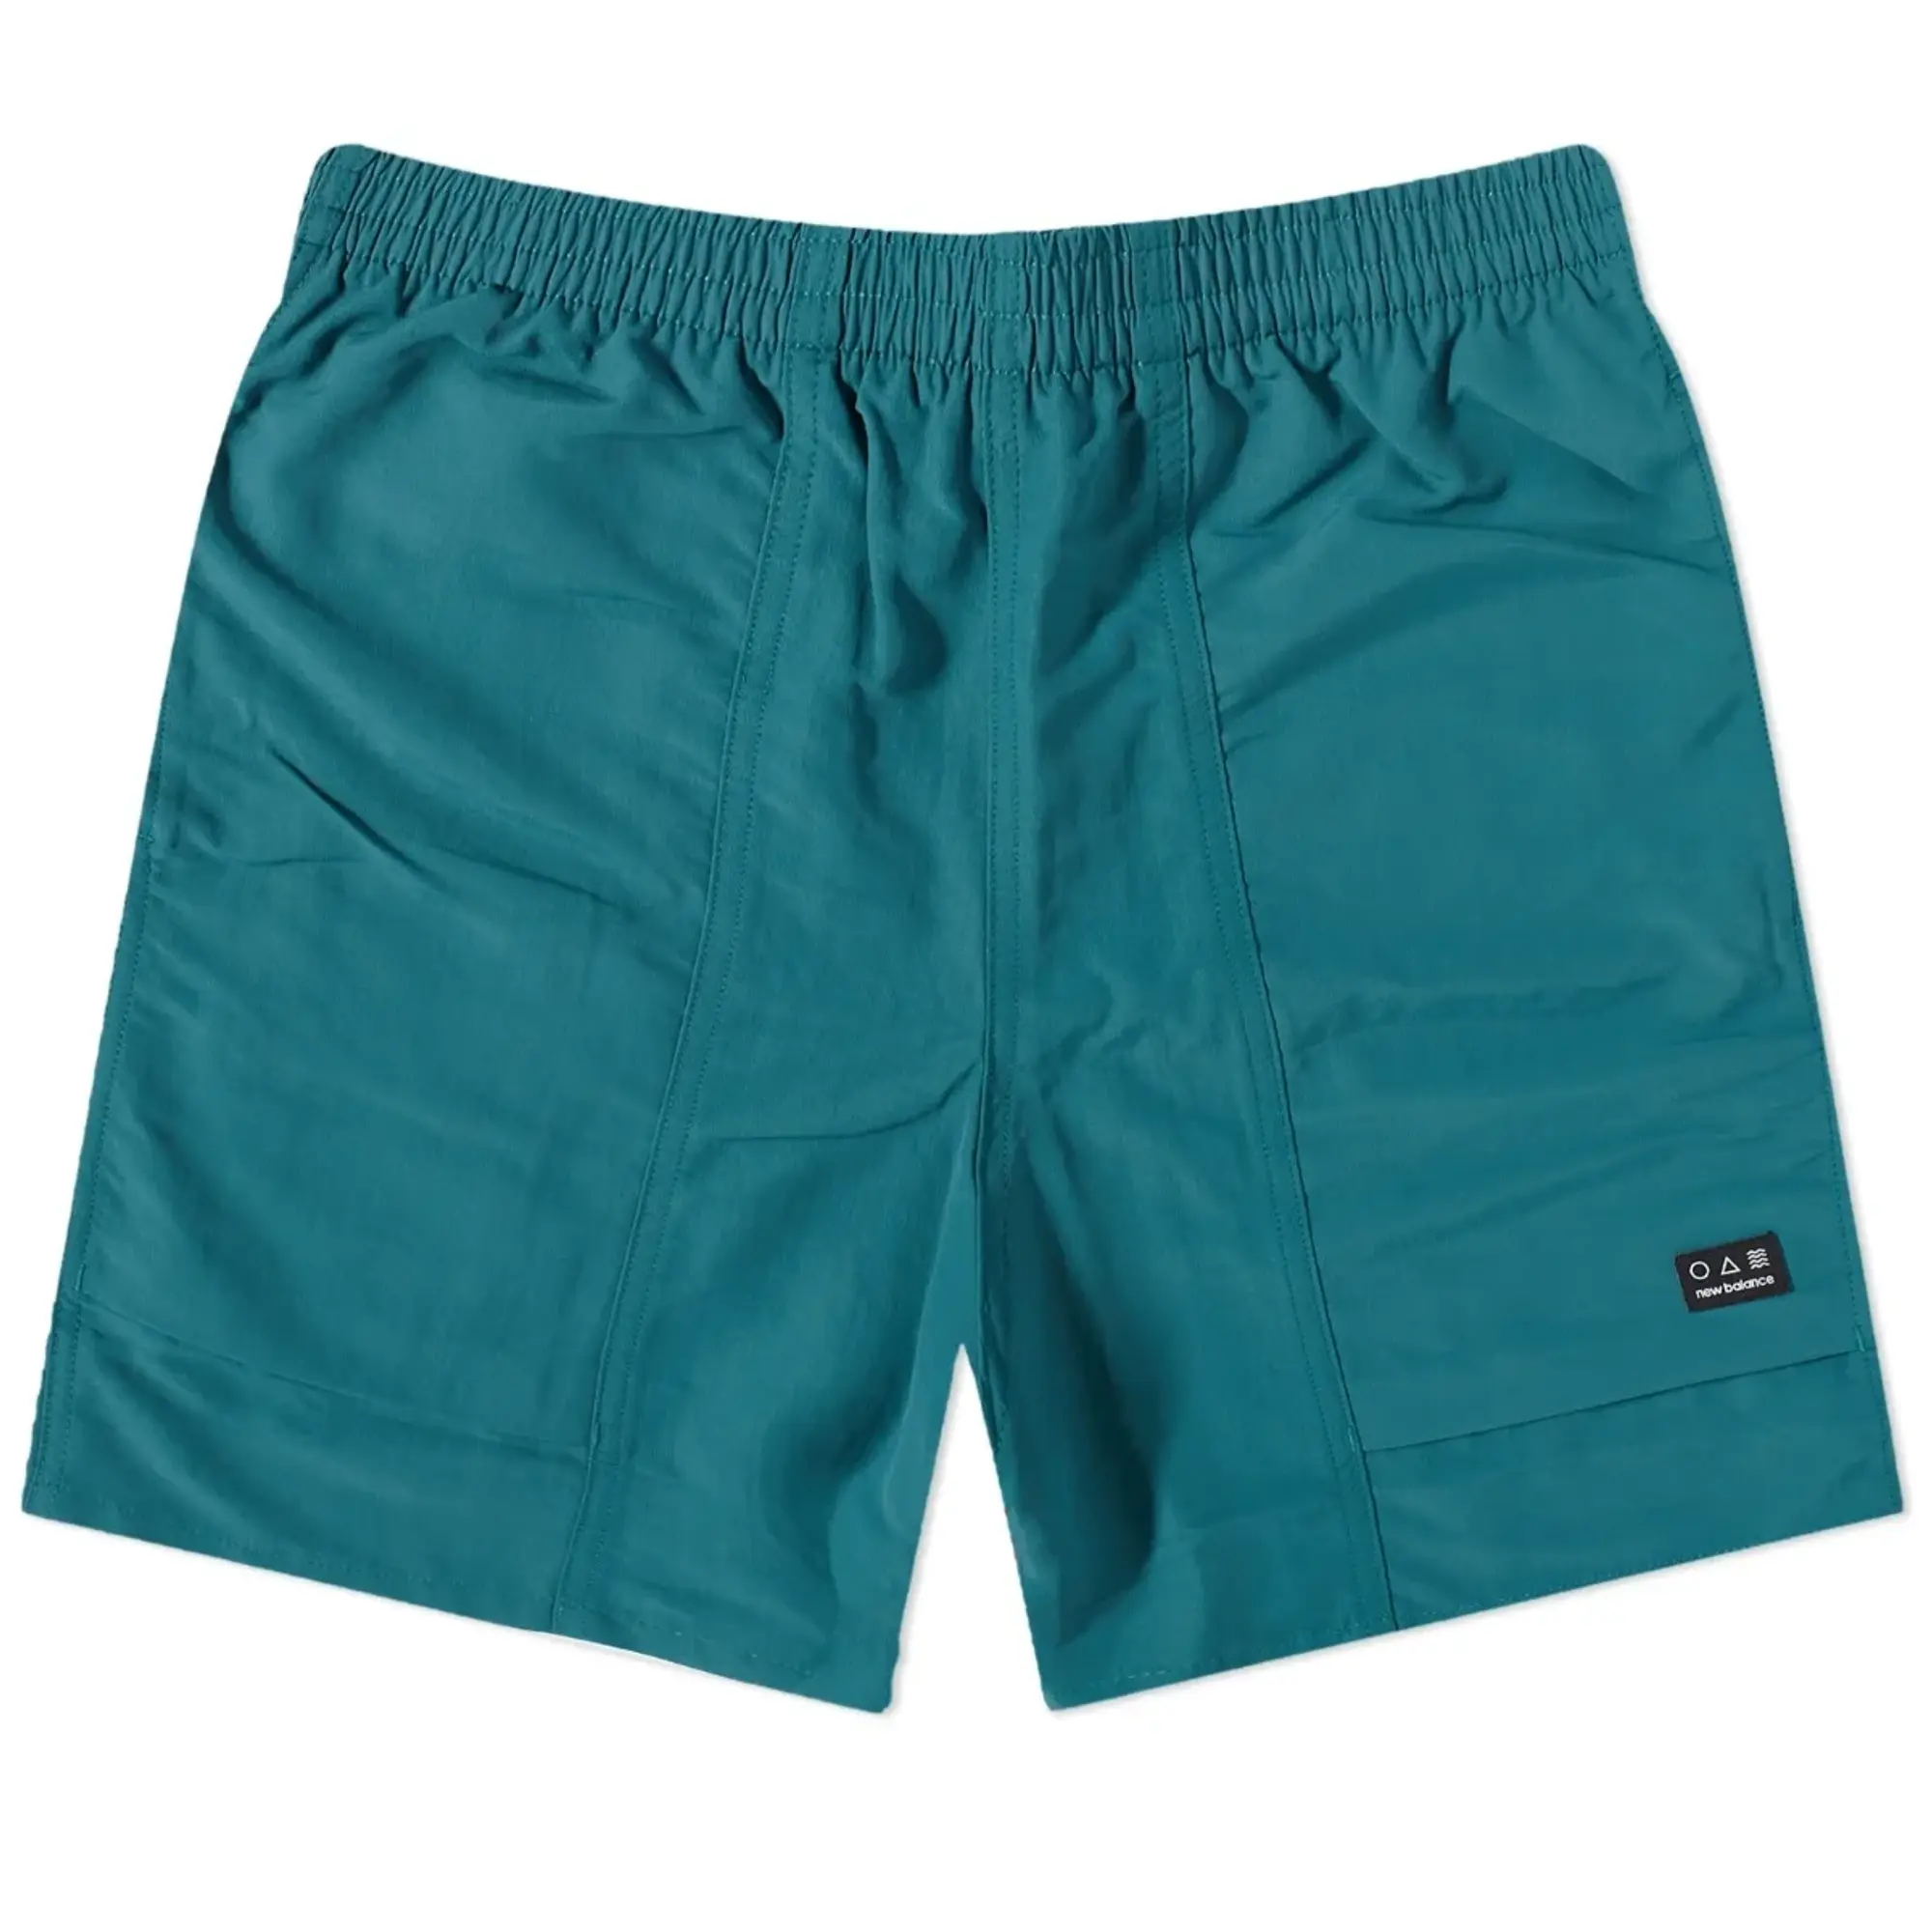 New Balance Men's AT Woven Short in Green Polywoven